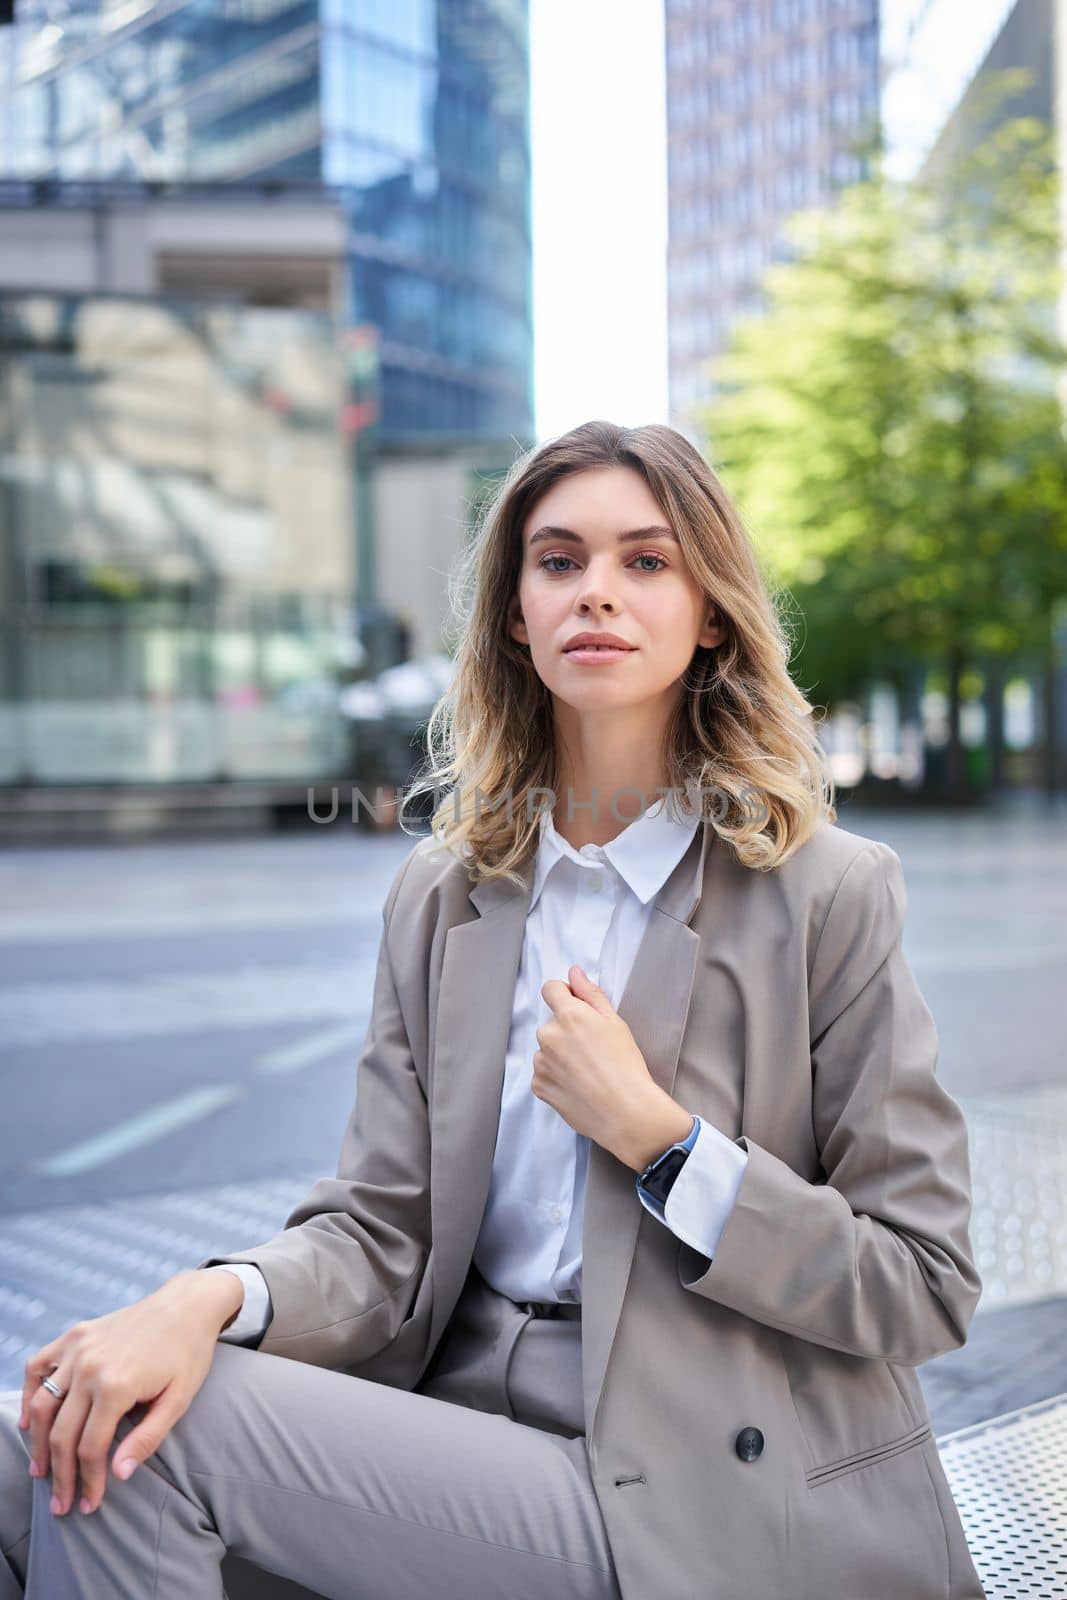 Vertical portrait of confident businesswoman in suit, adjust her blazer, looks self-assured. Candidate waits for an interview.